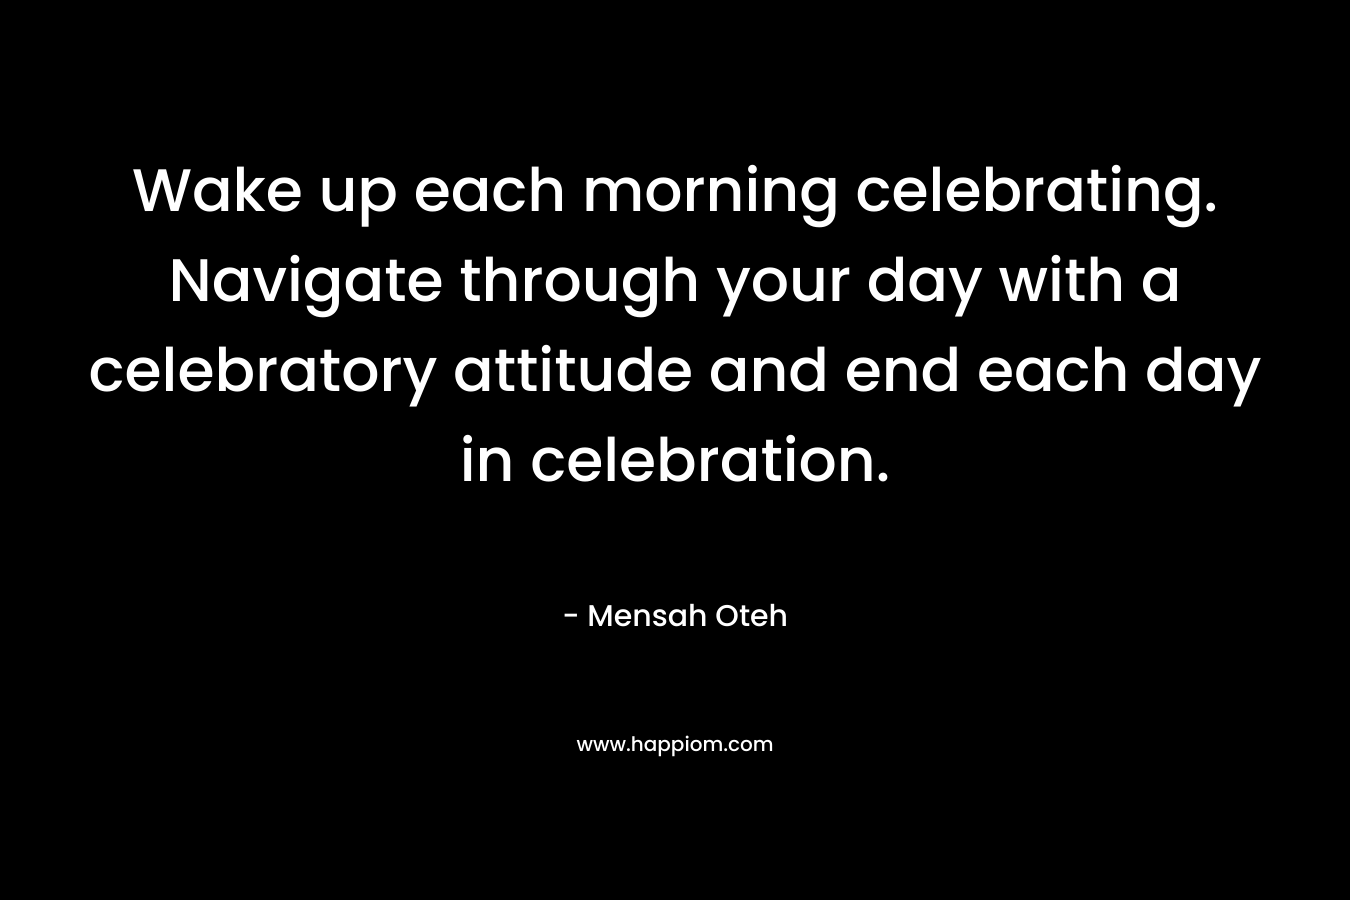 Wake up each morning celebrating. Navigate through your day with a celebratory attitude and end each day in celebration.